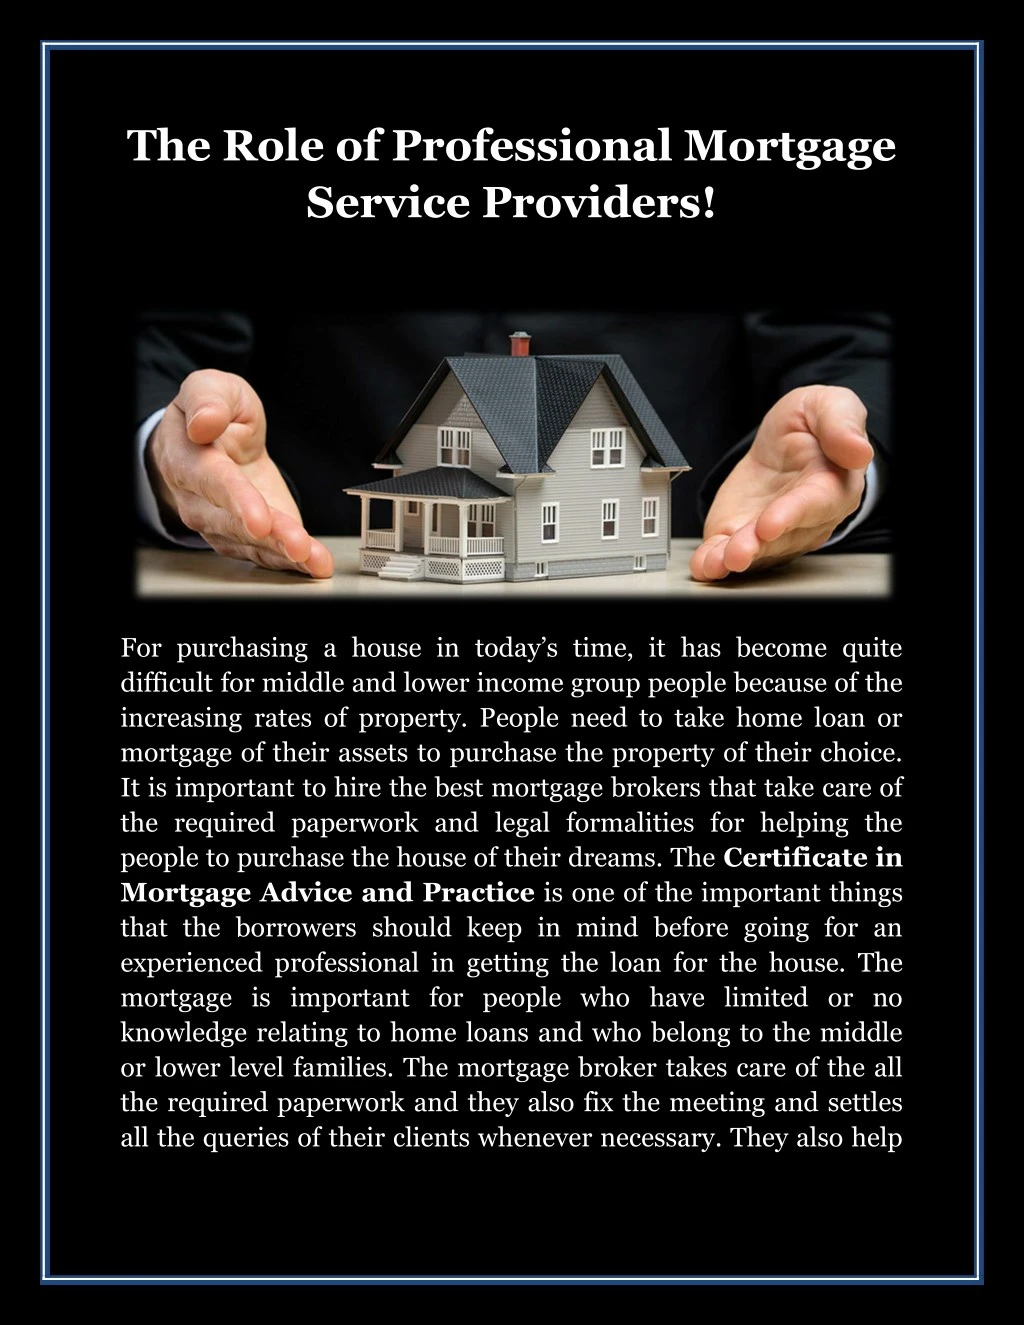 the role of professional mortgage service